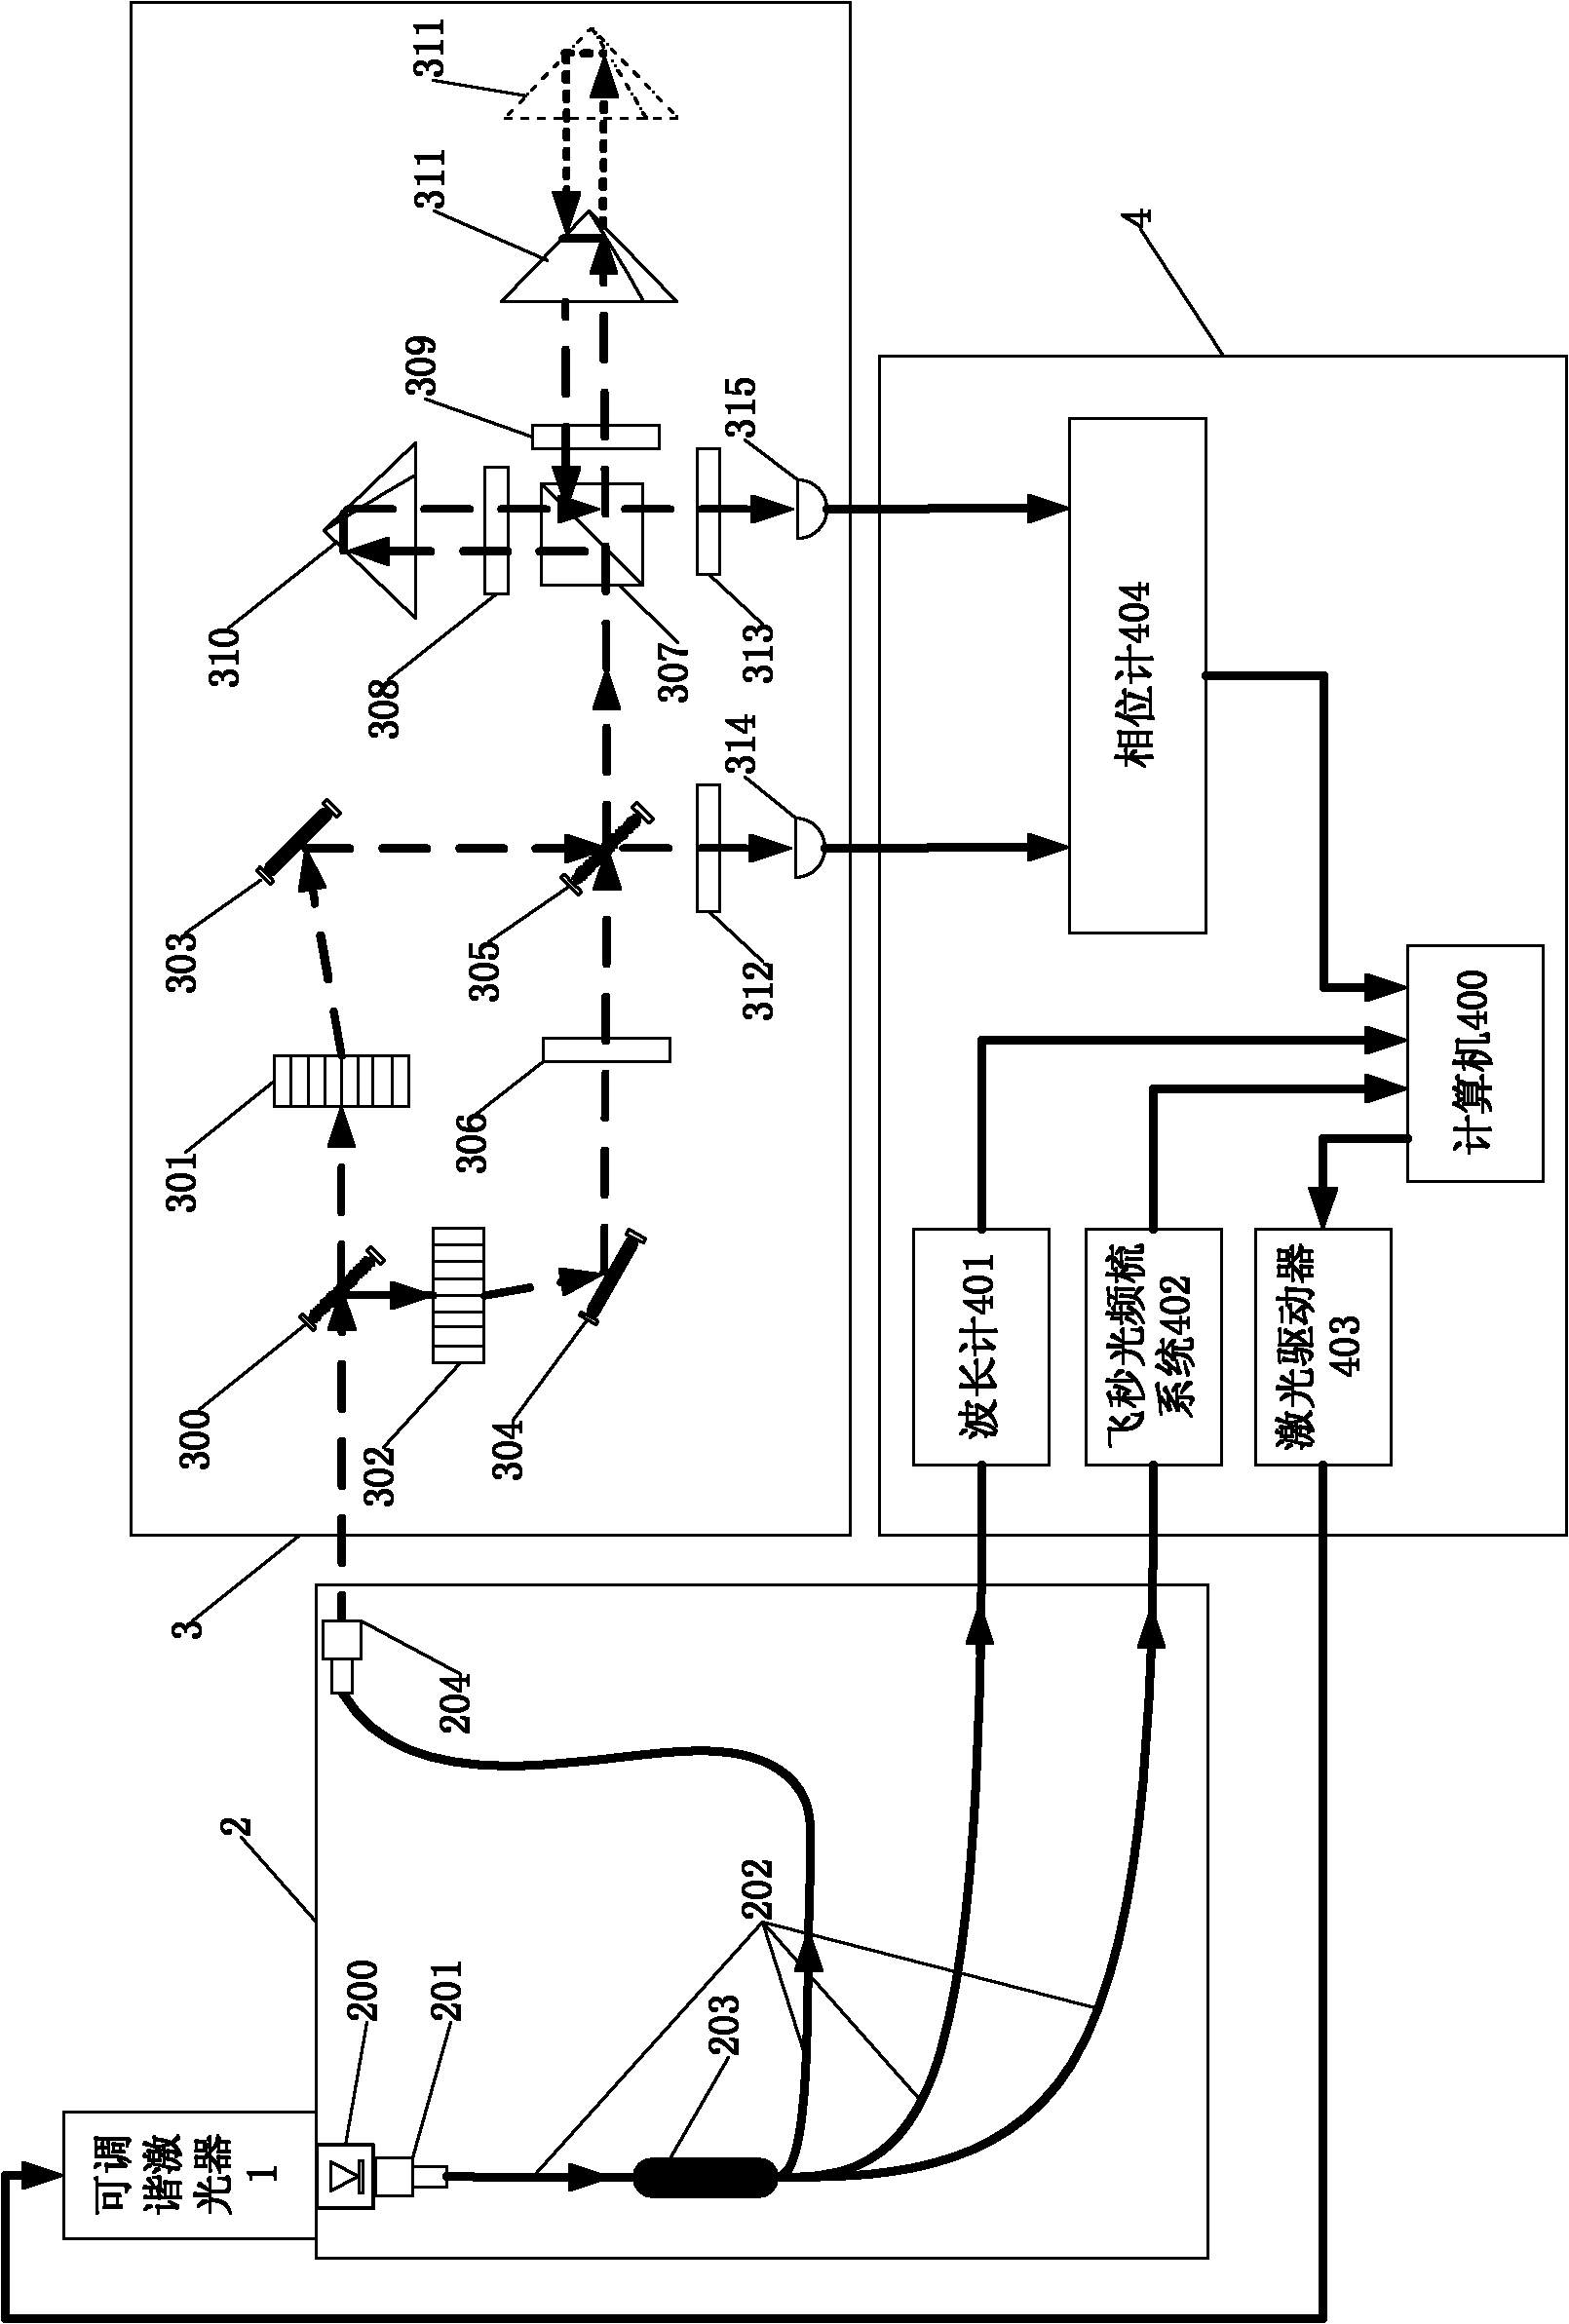 Method and device for measuring frequency scanning absolute distance based on femtosecond optical frequency comb